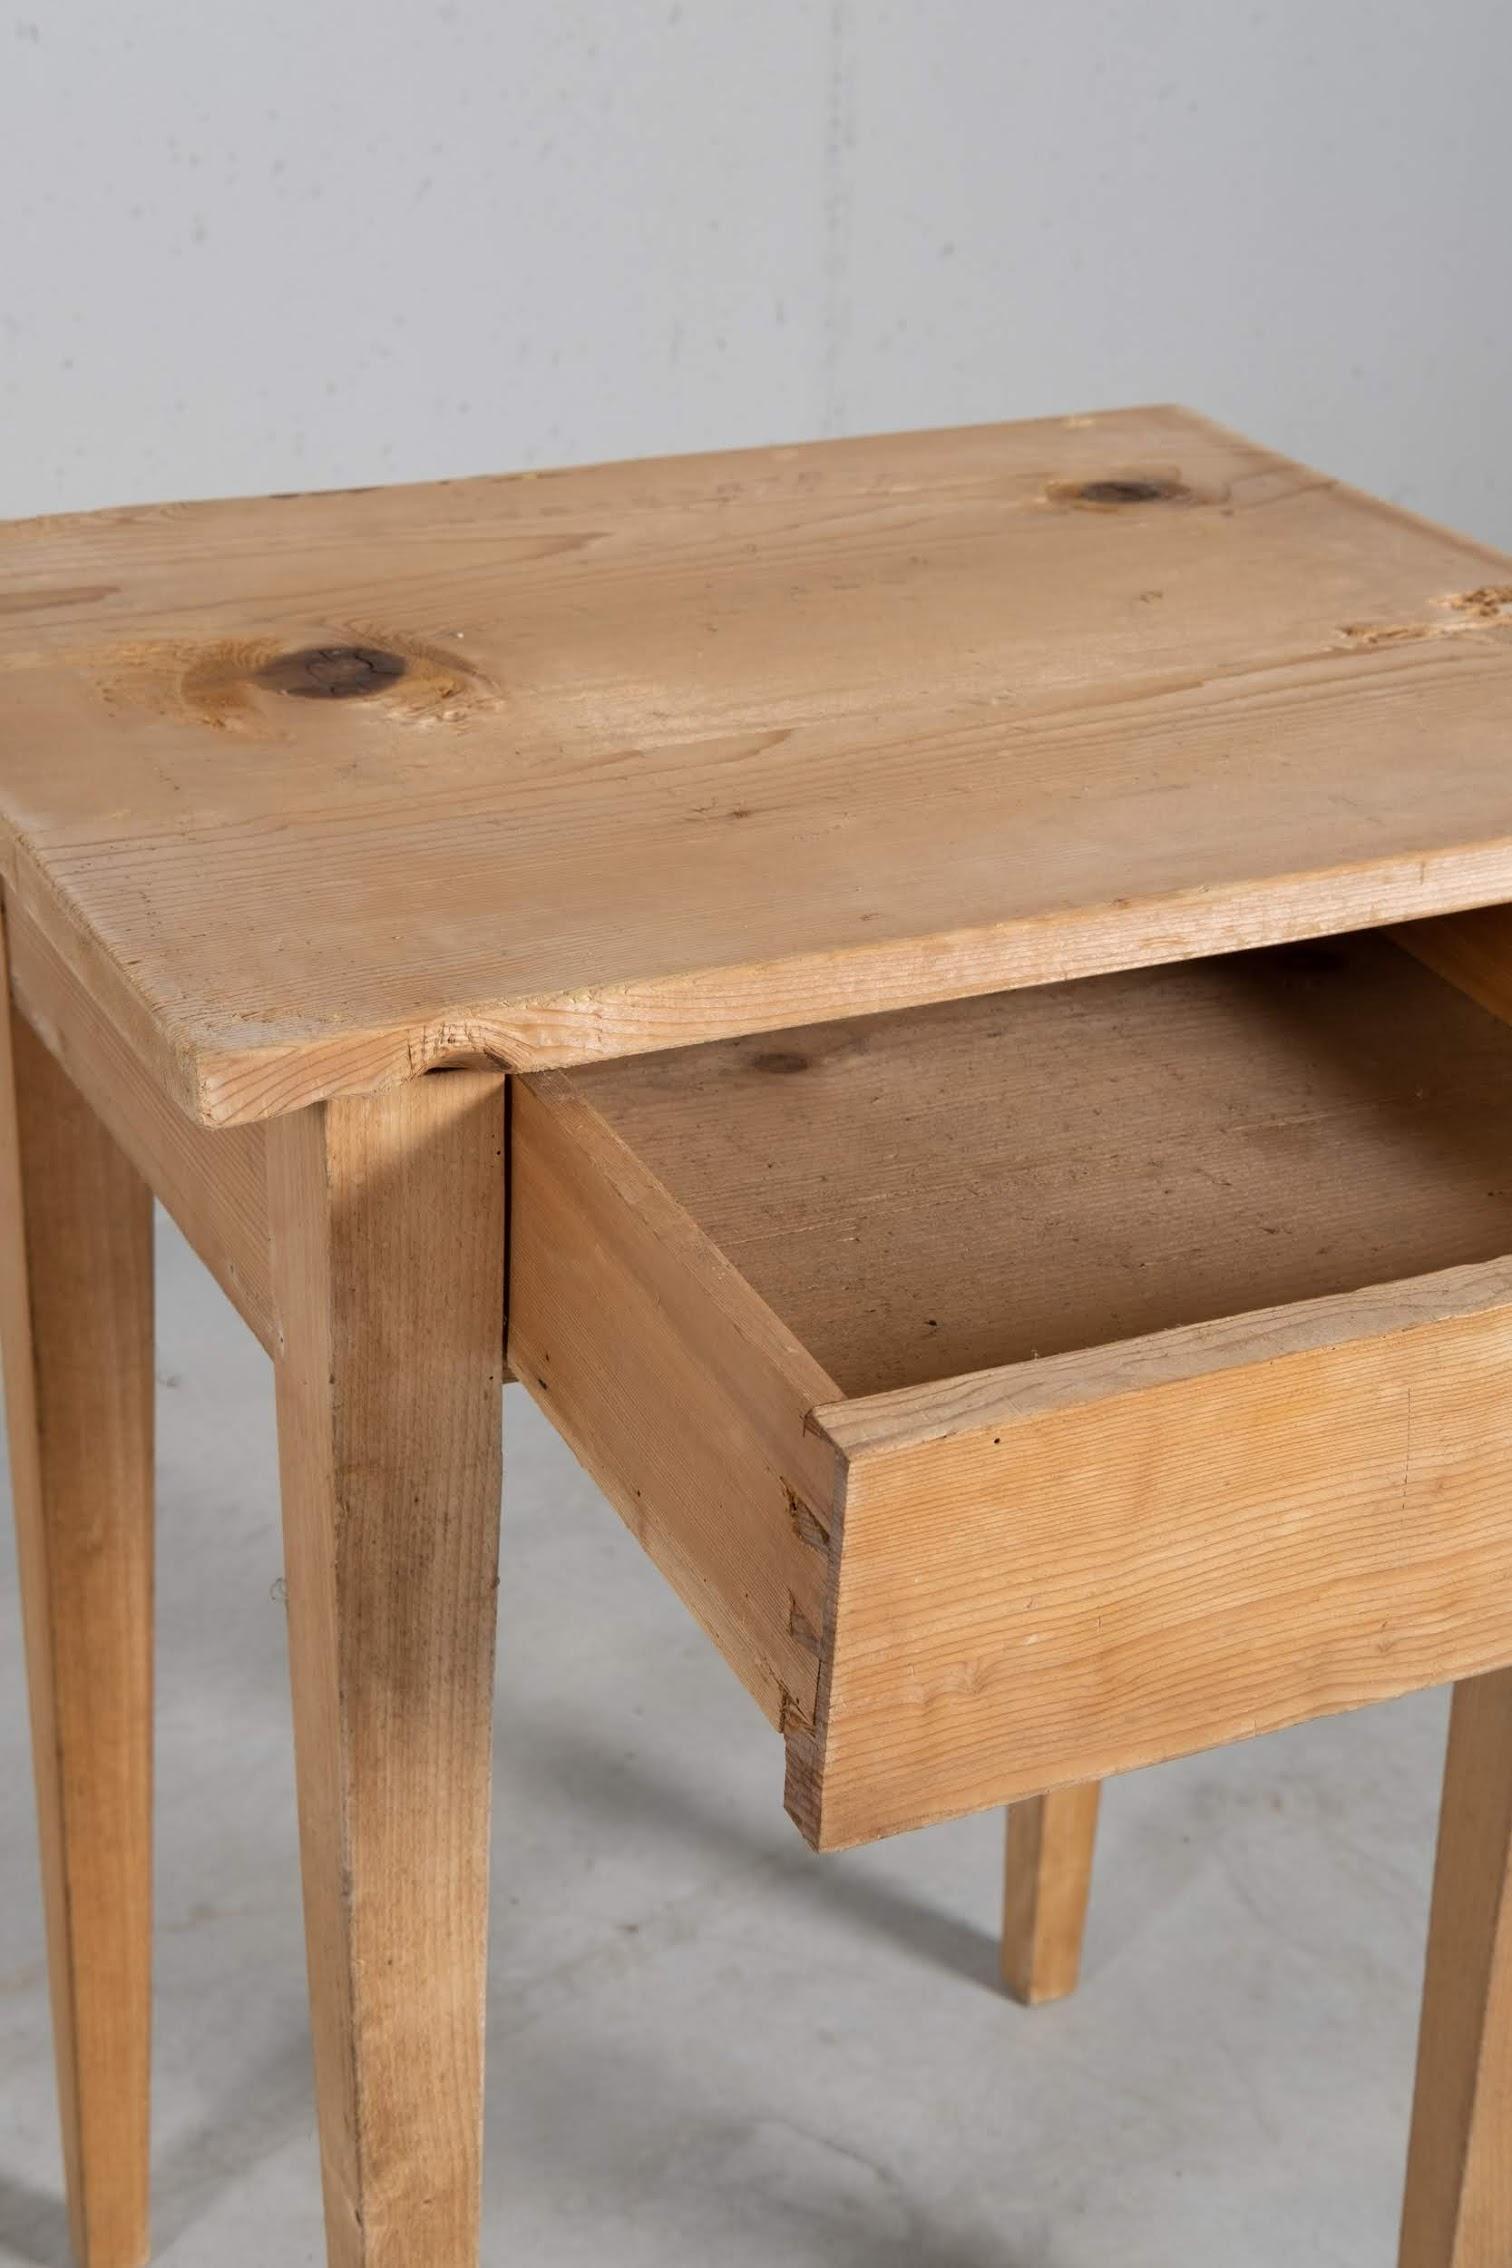 Simple yet rich in details small spruce table.